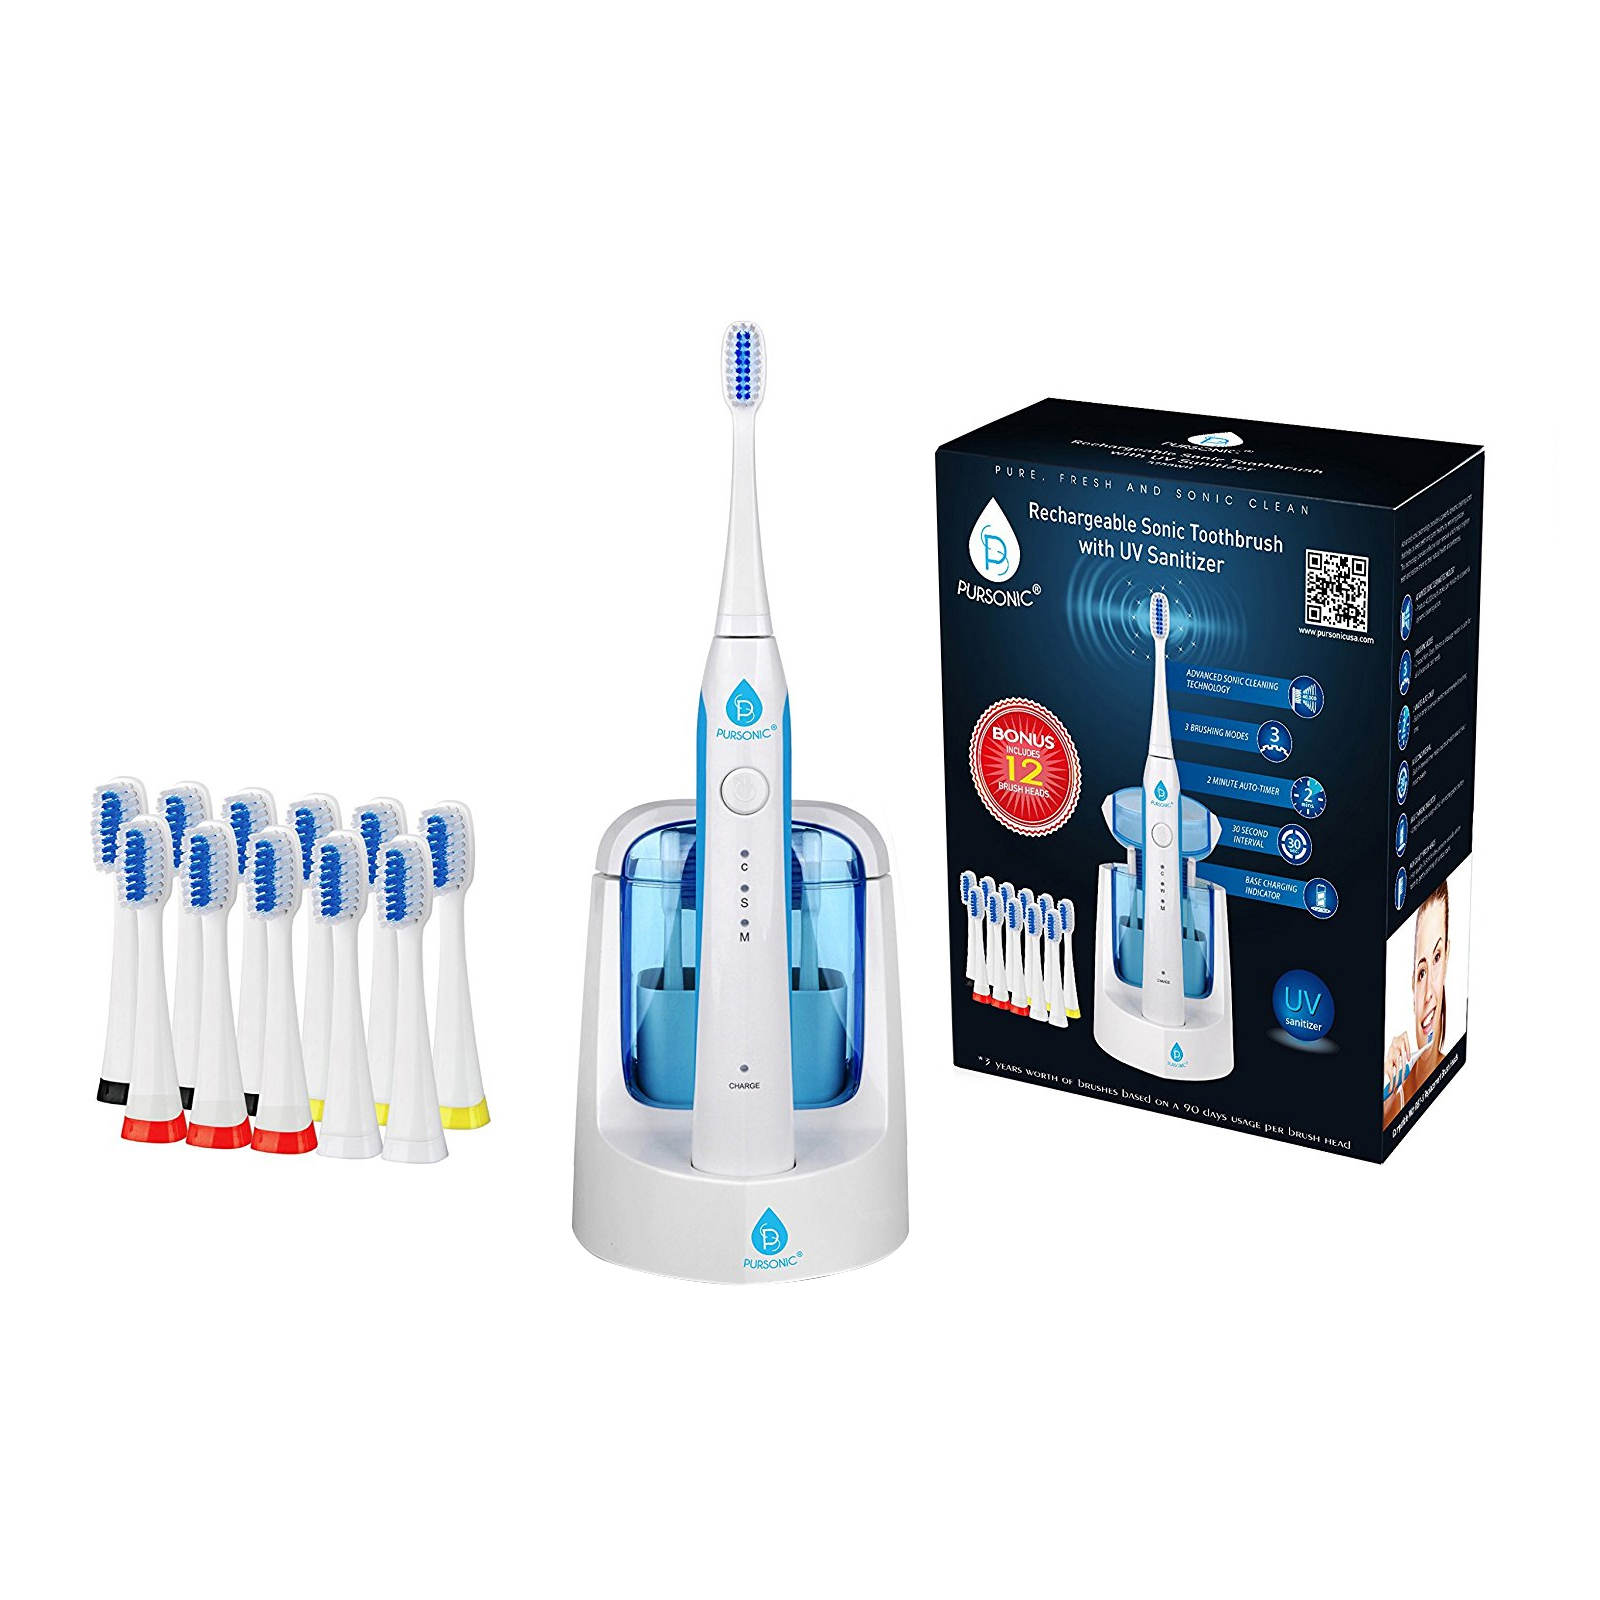 Pursonic  Sonic Toothbrush with UV Sanitizing Function in White